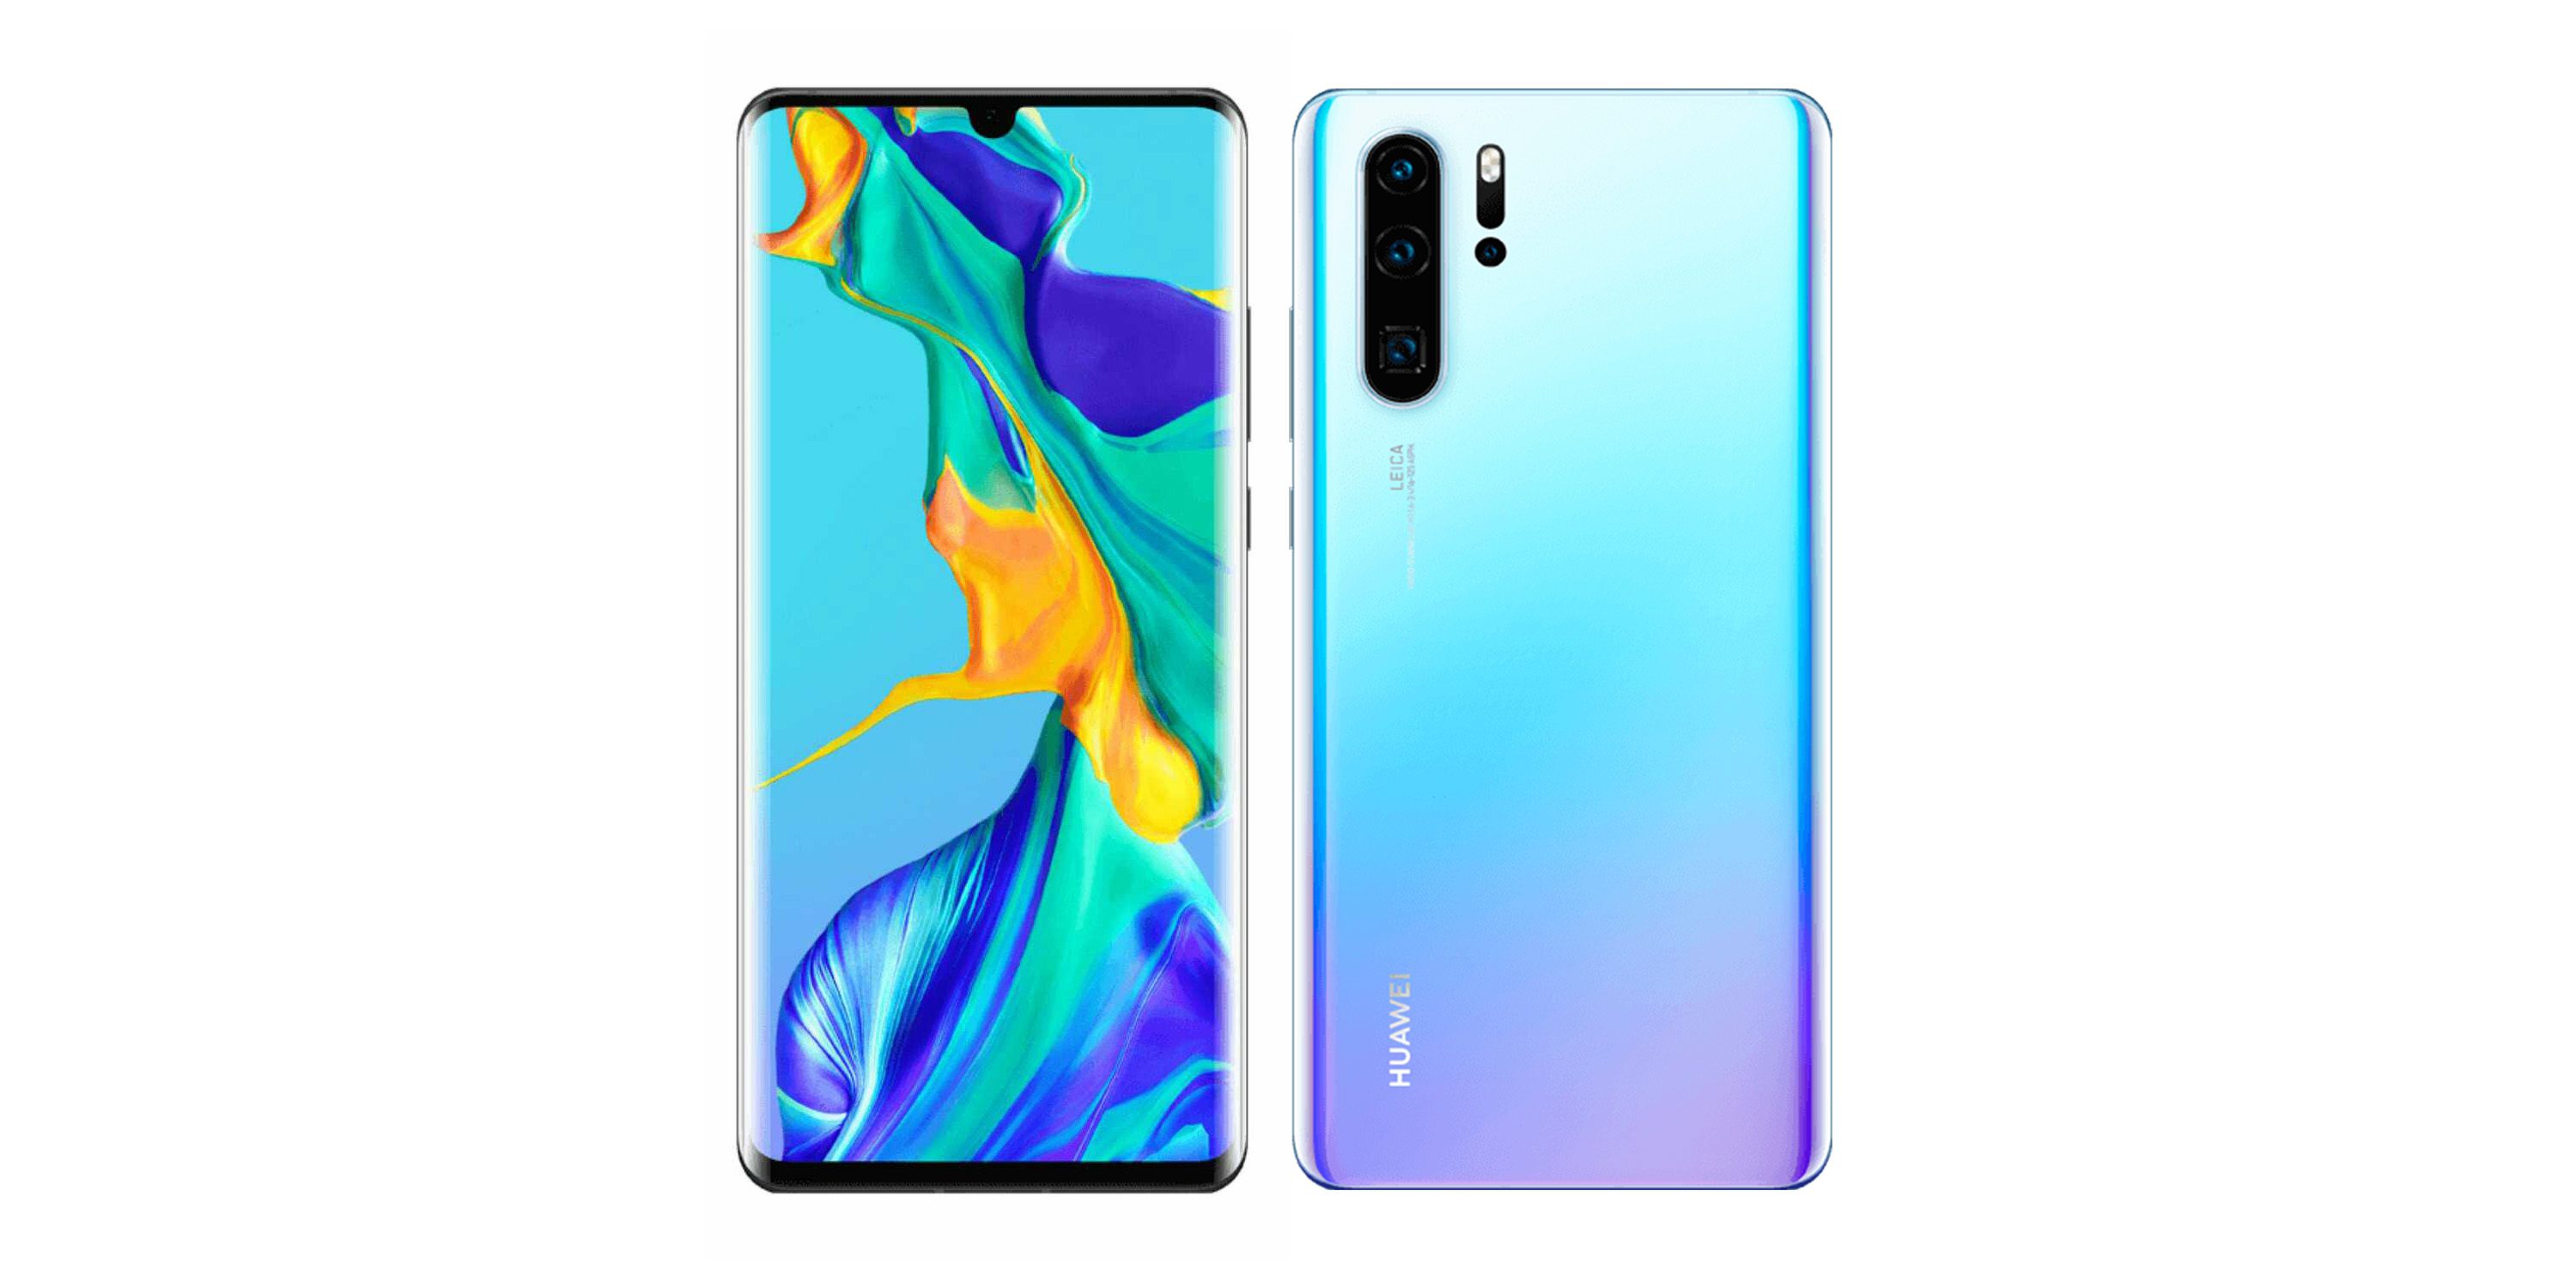 Huawei P30 Pro with in-screen fingerprint scanner and triple rear camera launched in India 2